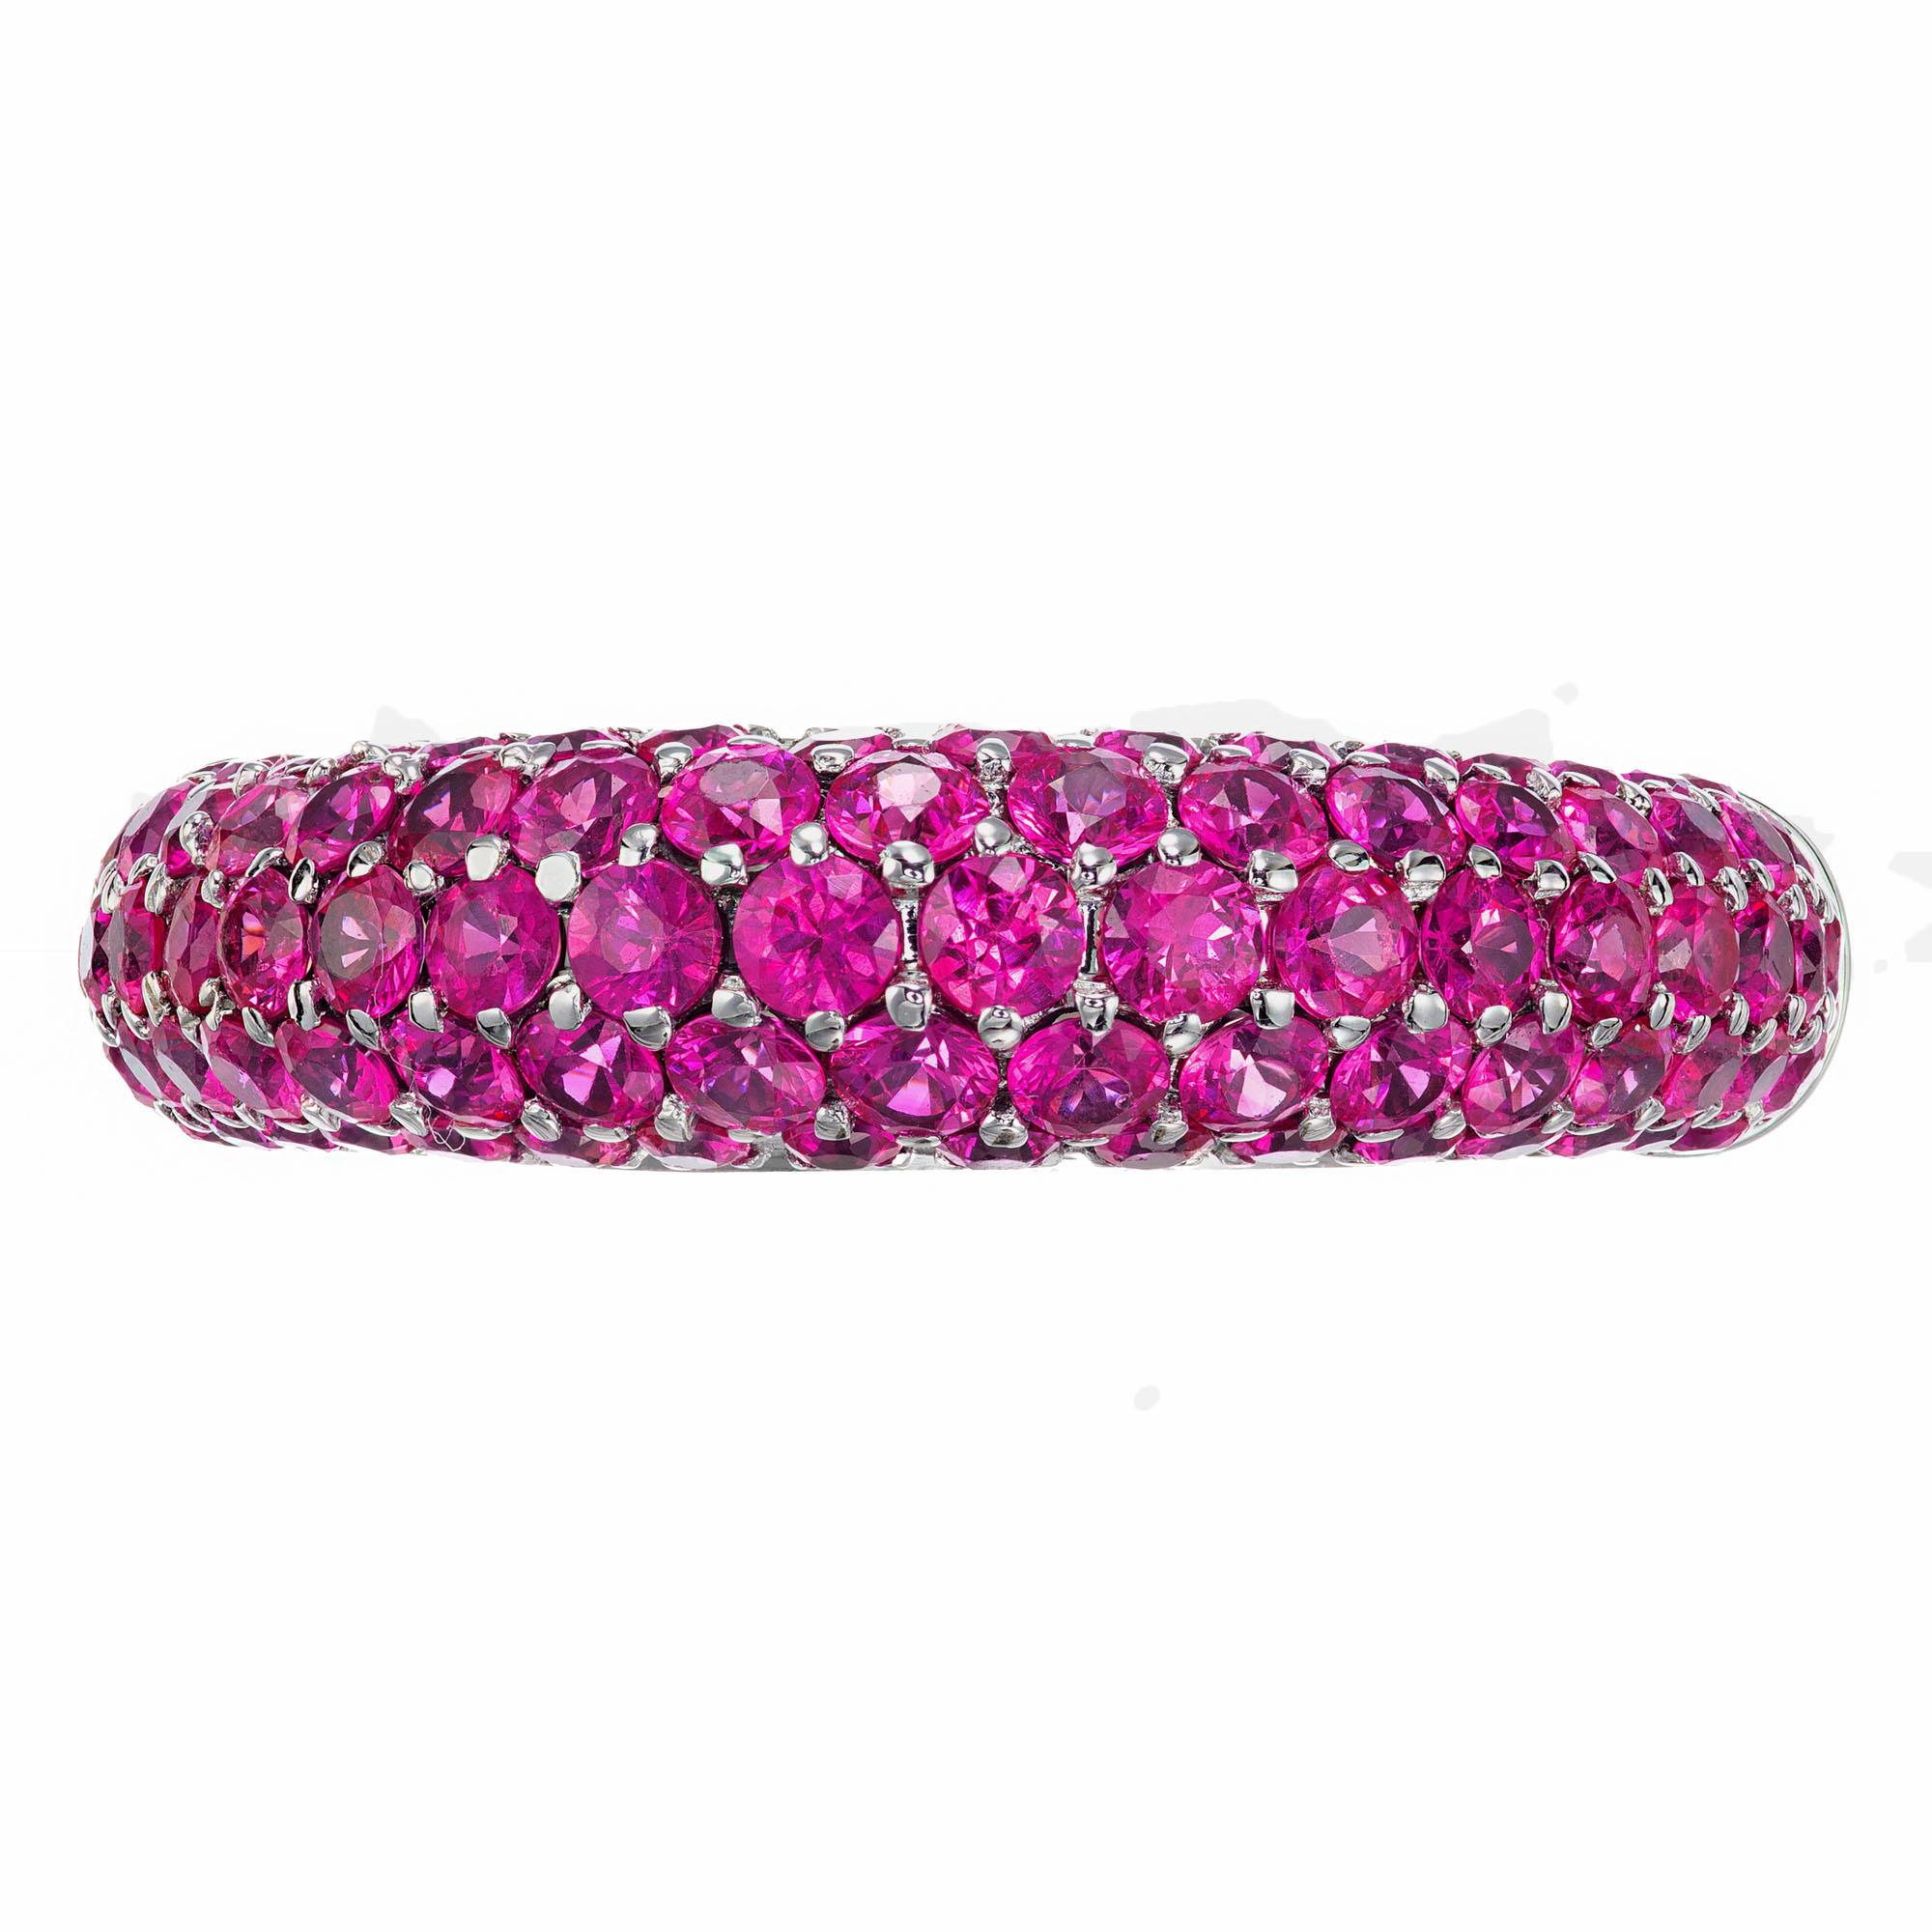 Domed five row bright pink Sapphire cluster band ring. 84 round sapphires set in 18k white gold.

84 round pink Sapphires, approx. total weight 2.00cts, VS – SI
Size 8.5 and sizable
Tested: 18k
Stamped: 750
18k white gold
9.2 grams
